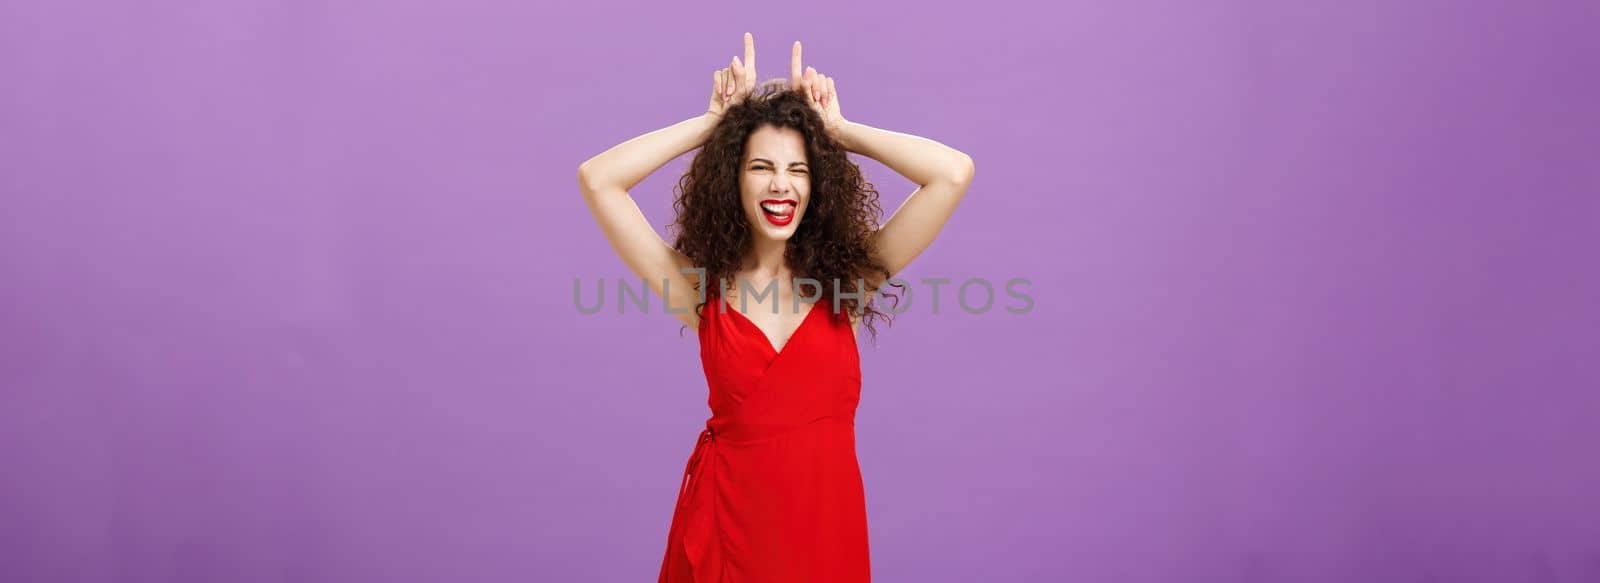 Devil lives inside lady. Daring stylish adult woman with curly hairstyle in red evening dress winking making confident and amused expression showing horns with index fingers on head, being stubborn by Benzoix